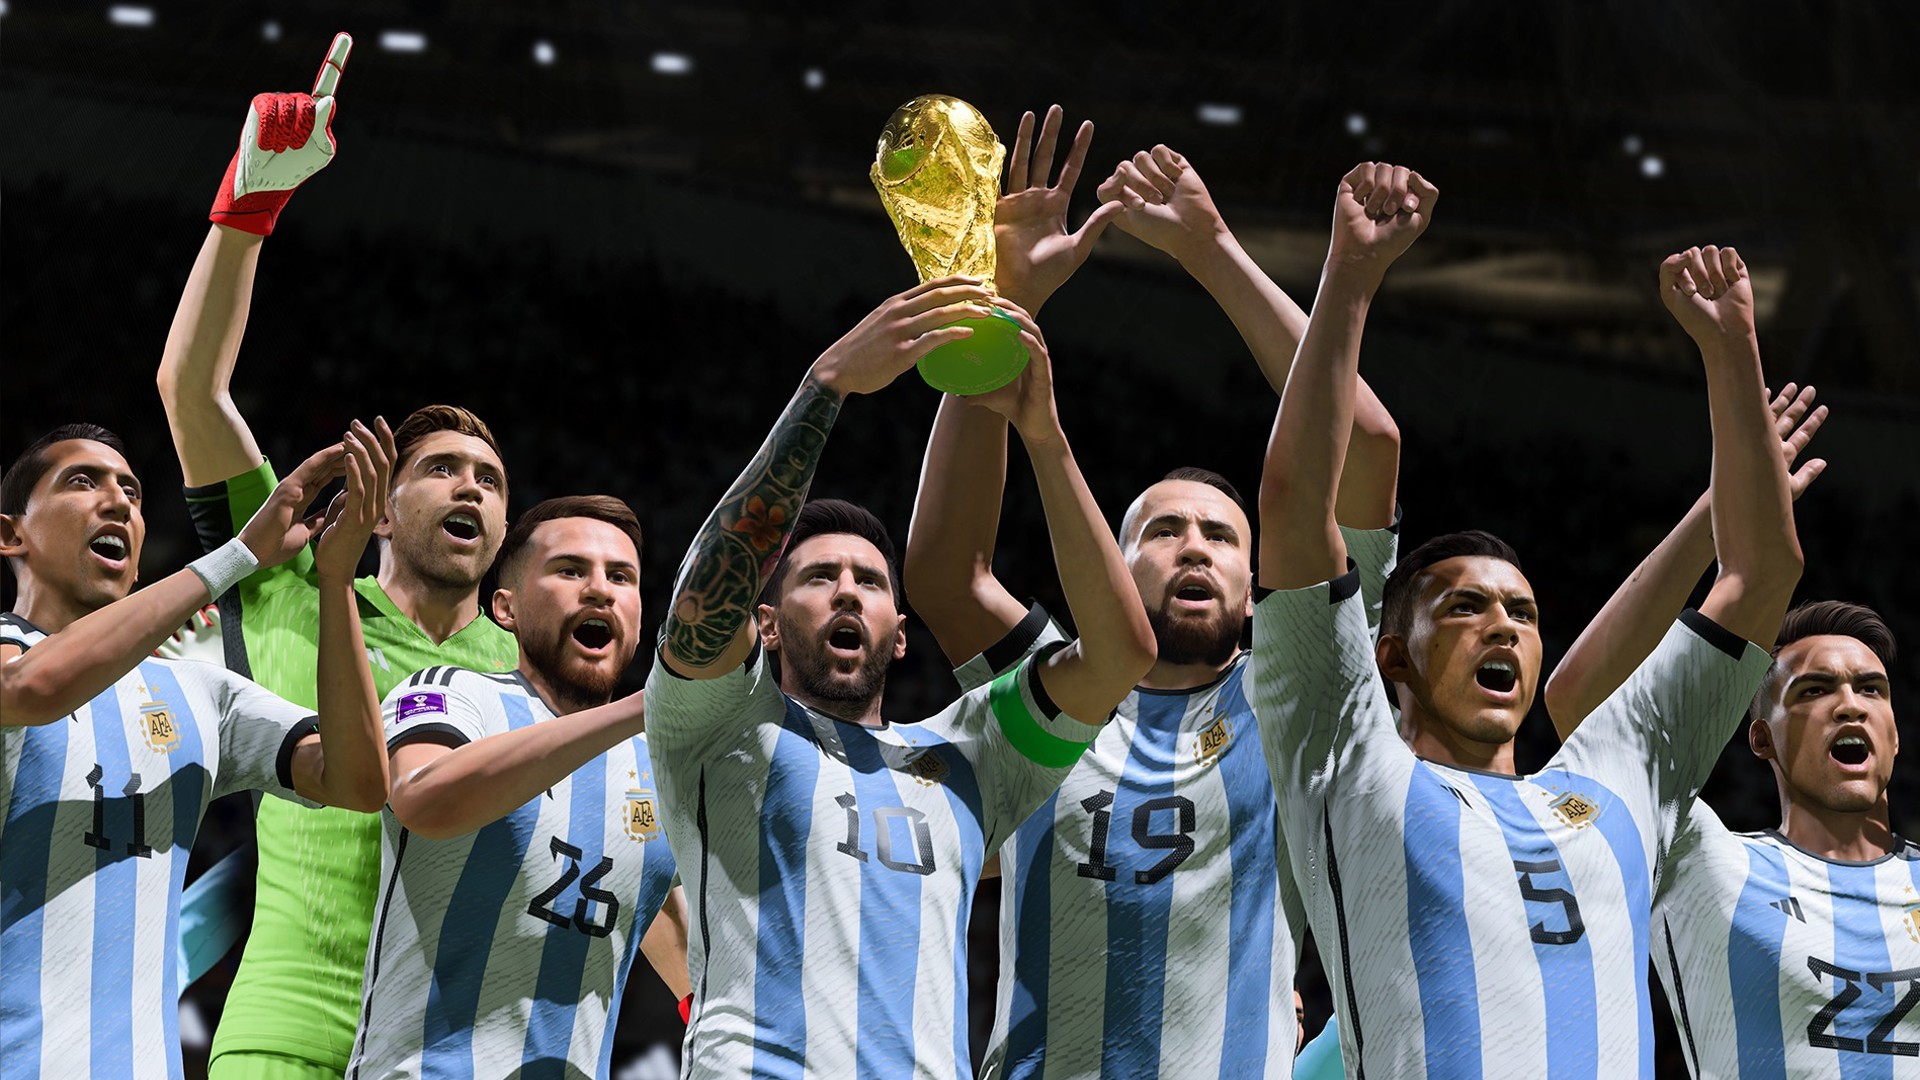 Phil Foden World Cup Team of the Tournament FIFA 23 - 90 - Rating and Price